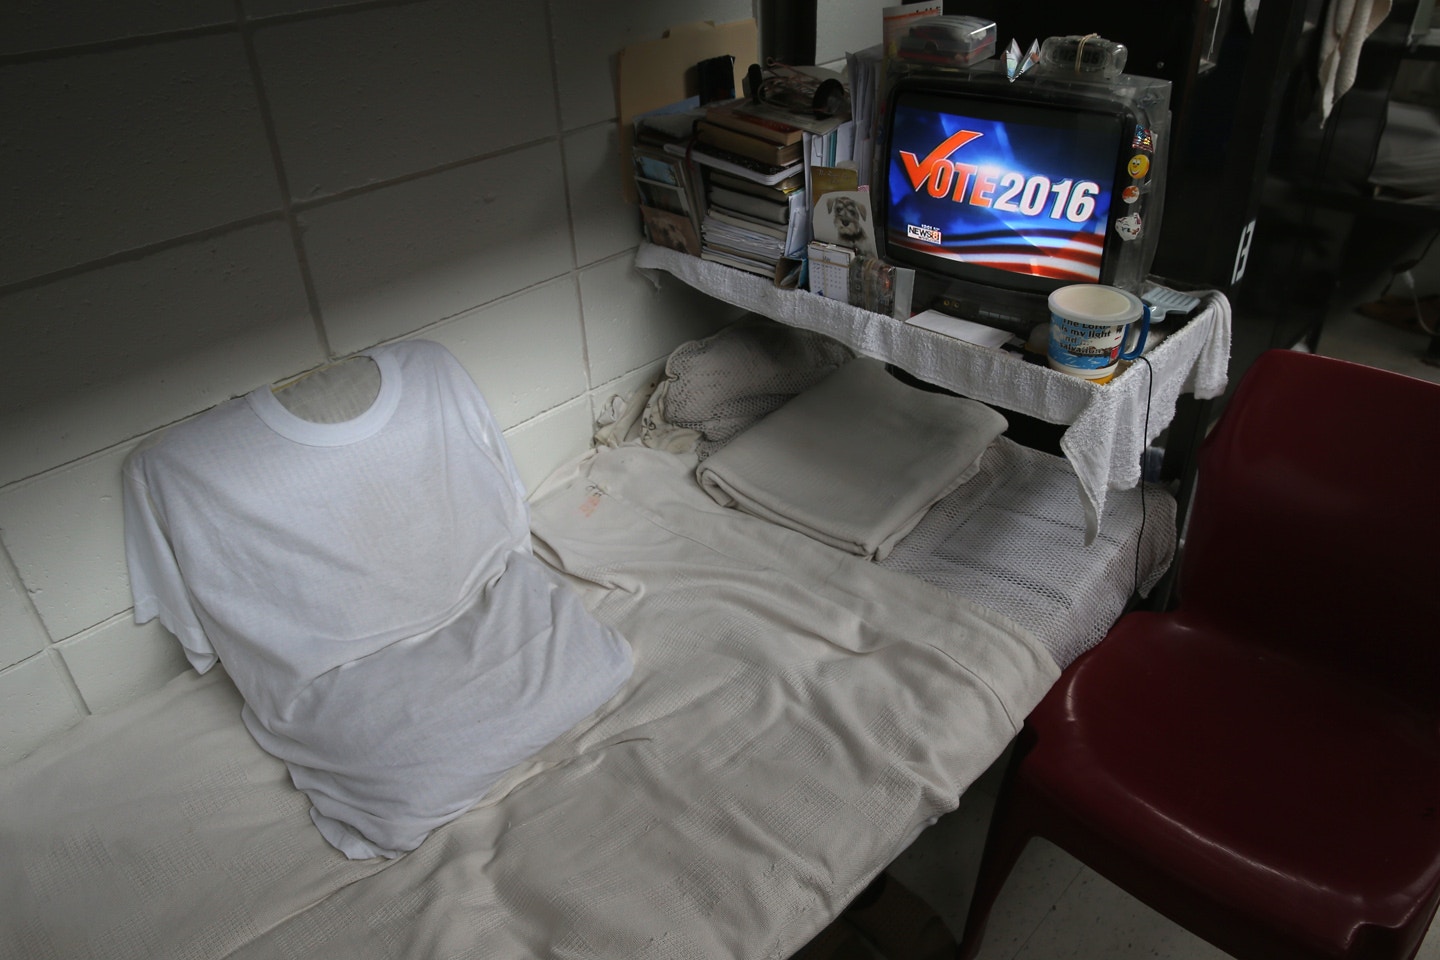 ENFIELD, CT - MAY 03:  Television news features Donald Trump over a prisoner's bunk at the Veterans Unit of the Cybulski Rehabilitation Center on May 3, 2016 in Enfield, Connecticut. Connecticut is one of only four states where voting rights are restored to convicted criminals immediately upon completion of their prison and parole time. The Veterans Unit houses some 110 inmates, all U.S. military veterans convicted of crimes ranging from petty larceny to murder. Prisoners at the unit typically have less than two years left on their sentences. The unit is part of a Connecticut Department of Correction program to turn some prisons into reintegration centers to prepare inmates for successful re-entry into society. Criminal justice and prison reforms are taking hold with bi-partisan support nationwide in an effort to reduce prison populations and recidivism. The state's criminal justice reforms fall under Connecticut Governor Dannel Malloy's "Second Chance Society" legislation.  (Photo by John Moore/Getty Images)